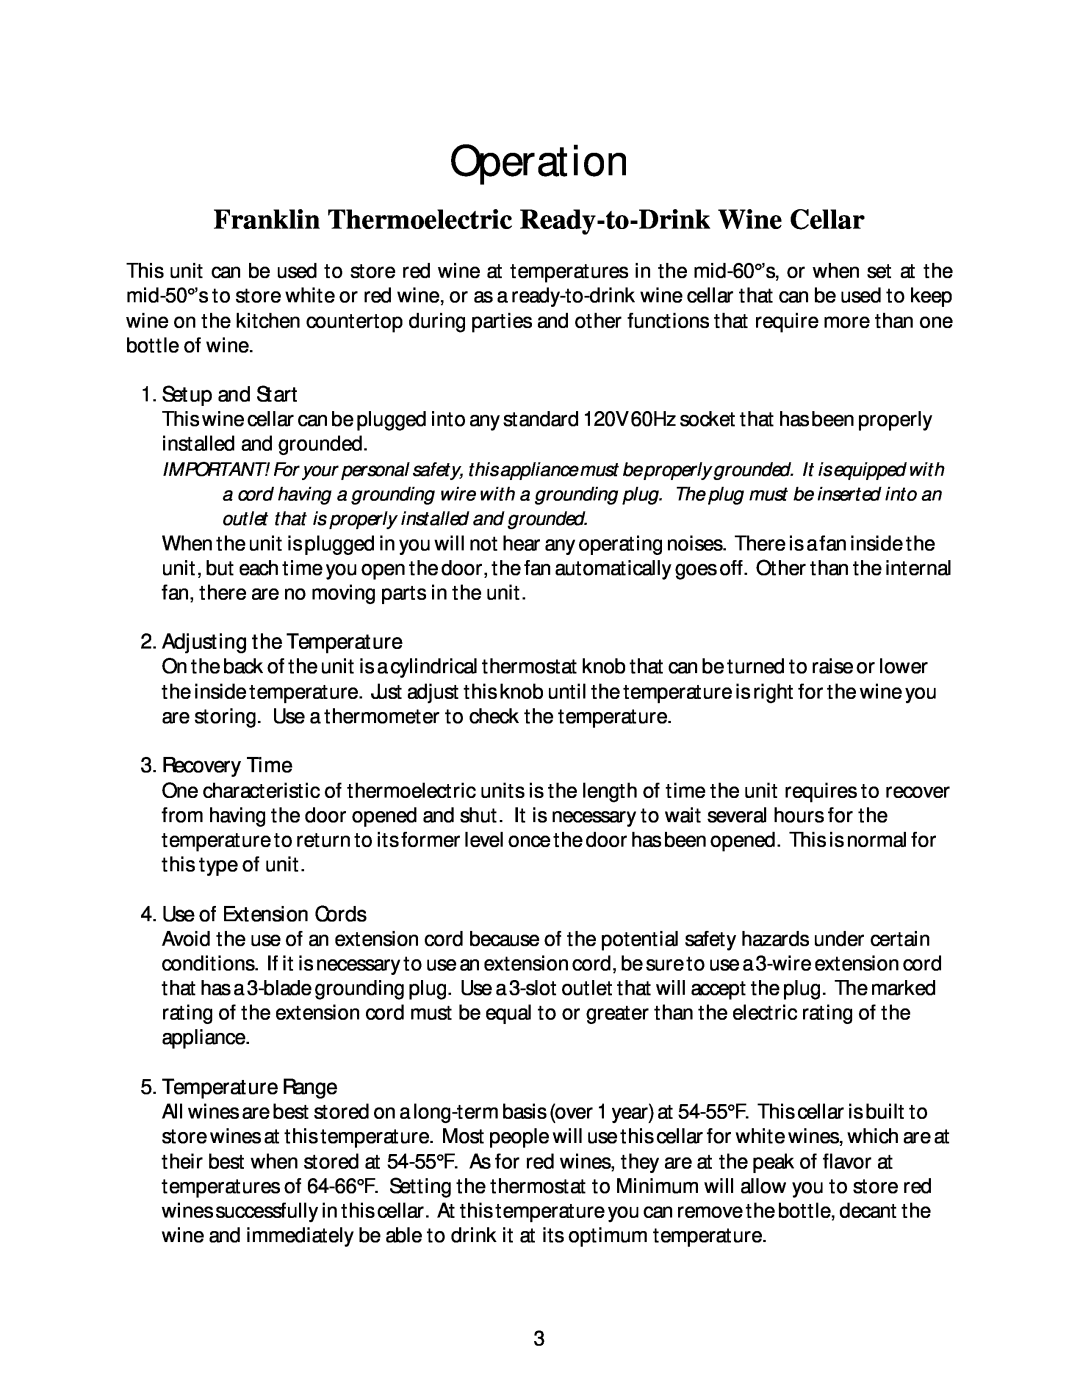 Franklin Industries, L.L.C FCW20TC, FCW16T Operation, Franklin Thermoelectric Ready-to-DrinkWine Cellar, Setup and Start 